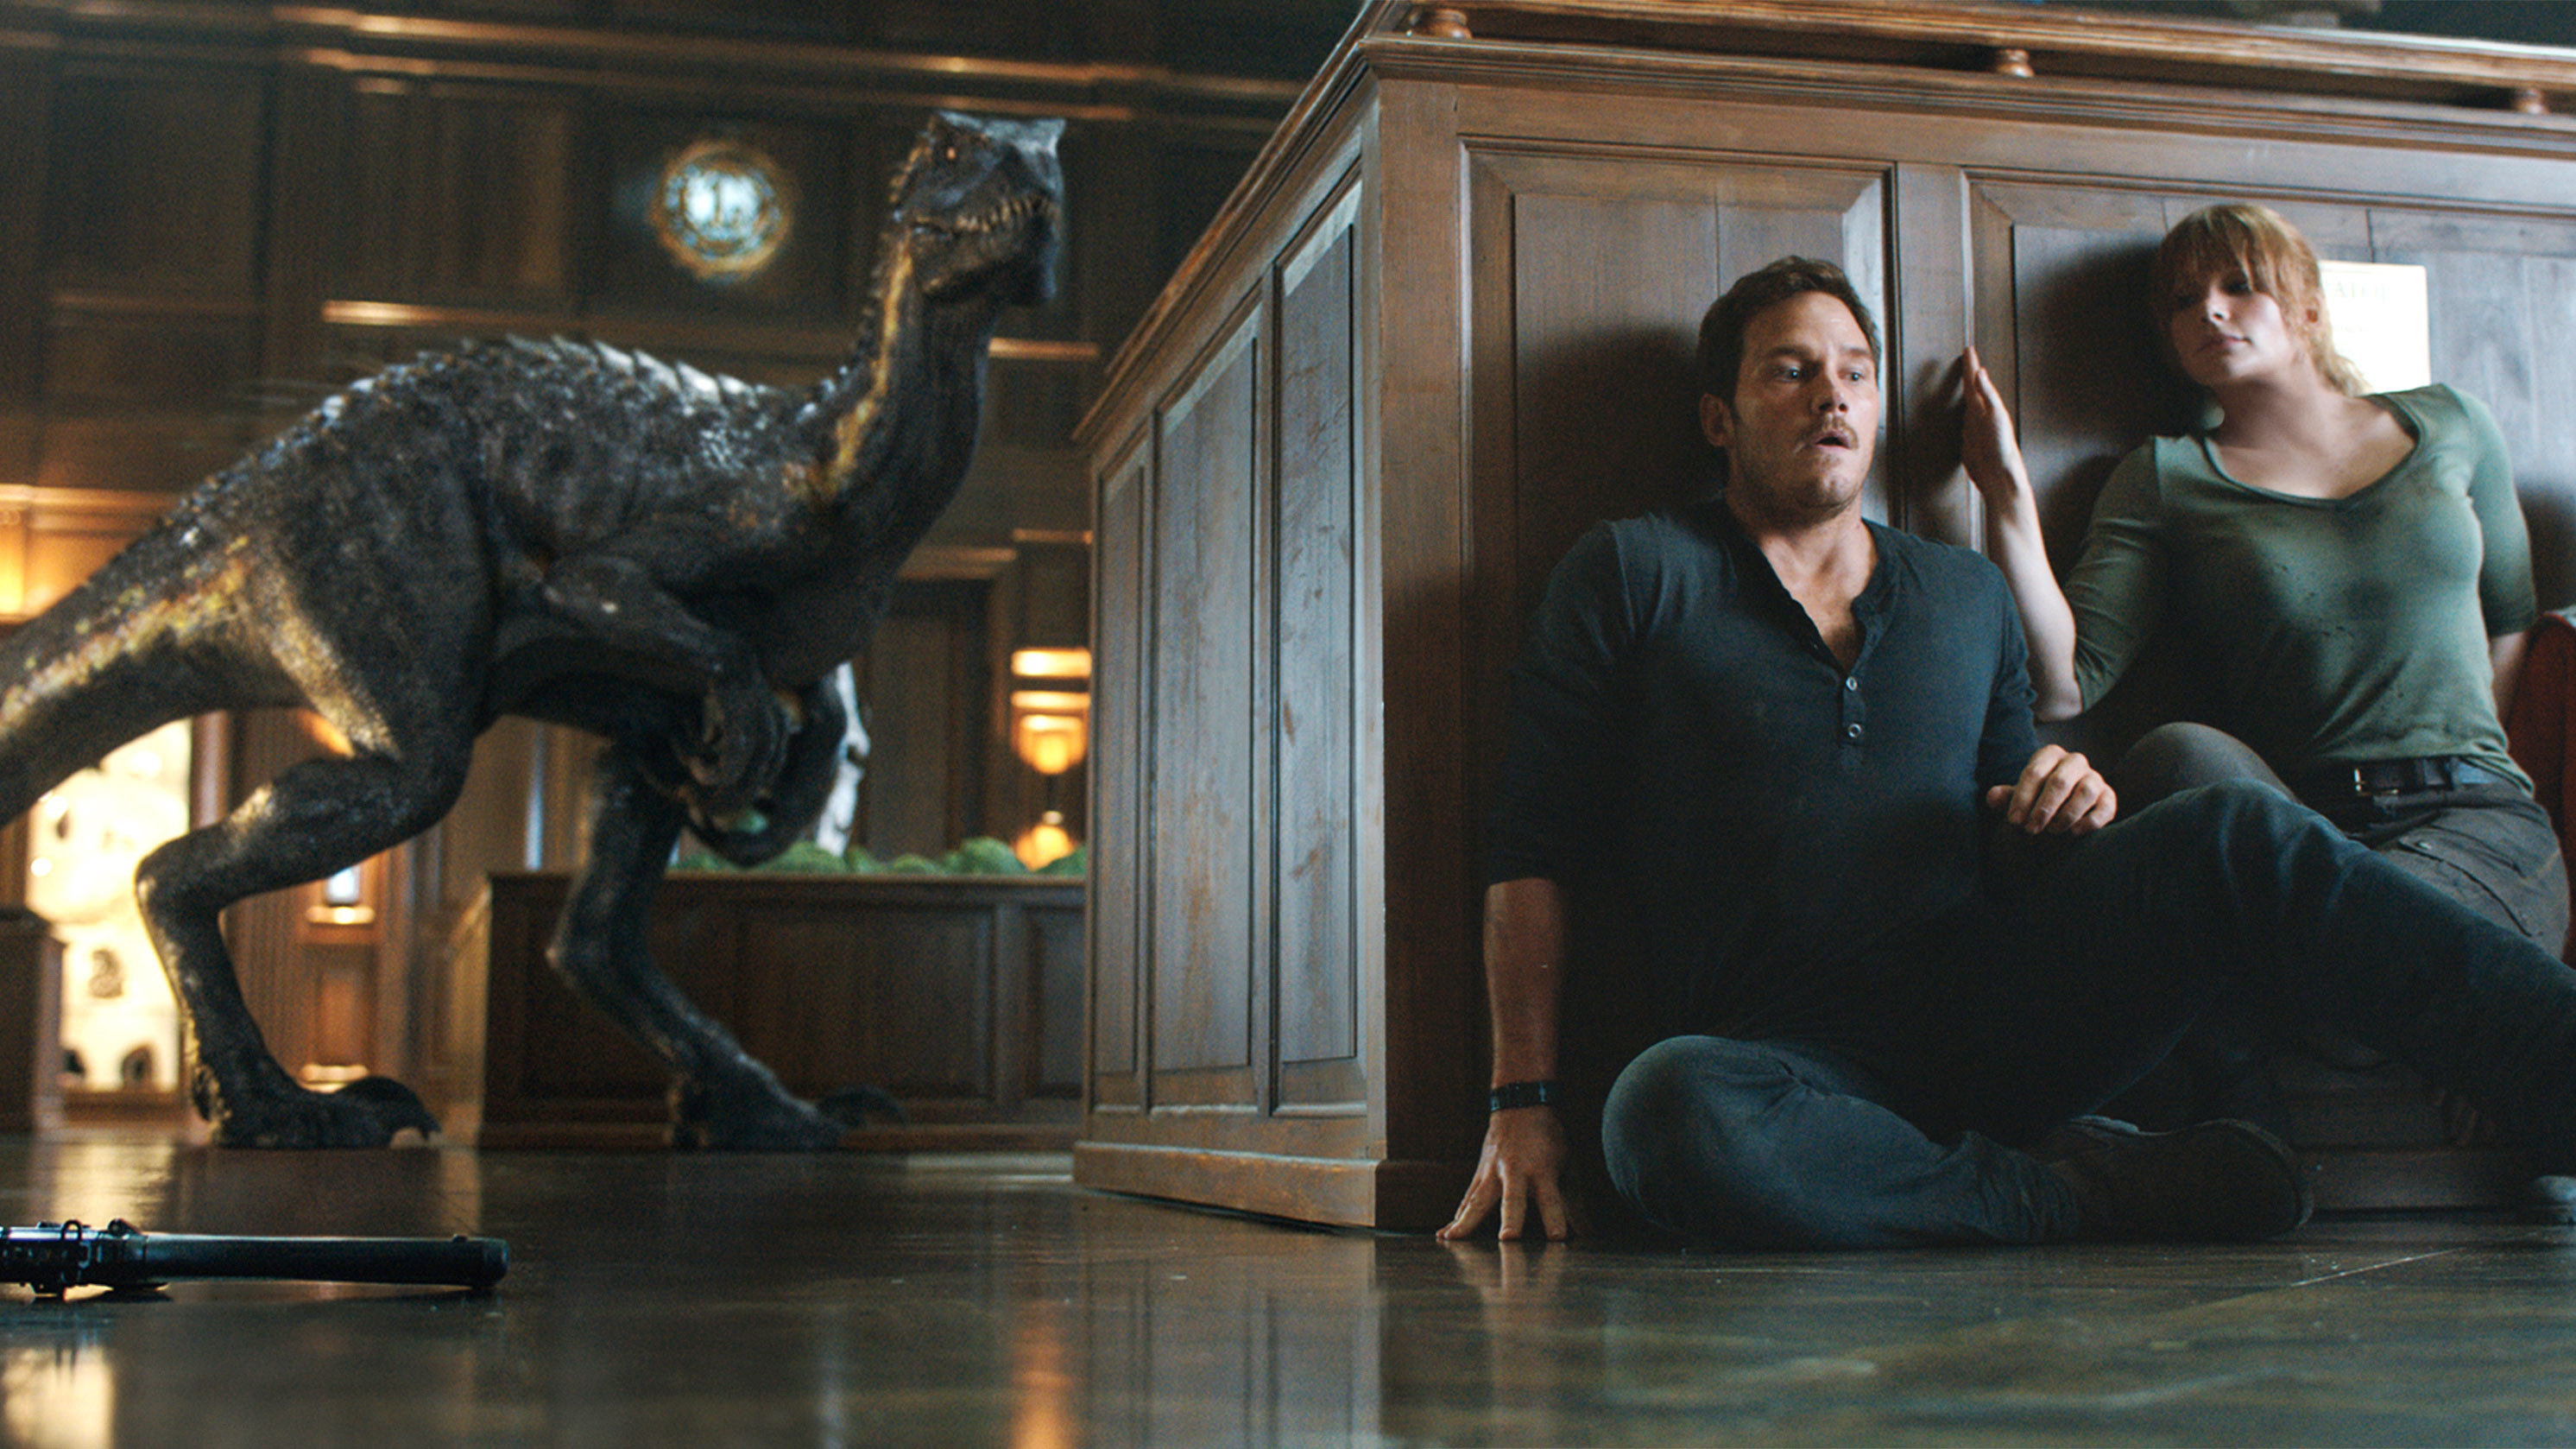 chris pratt as owen and bryce dallas howard as claire hide from a velociraptor